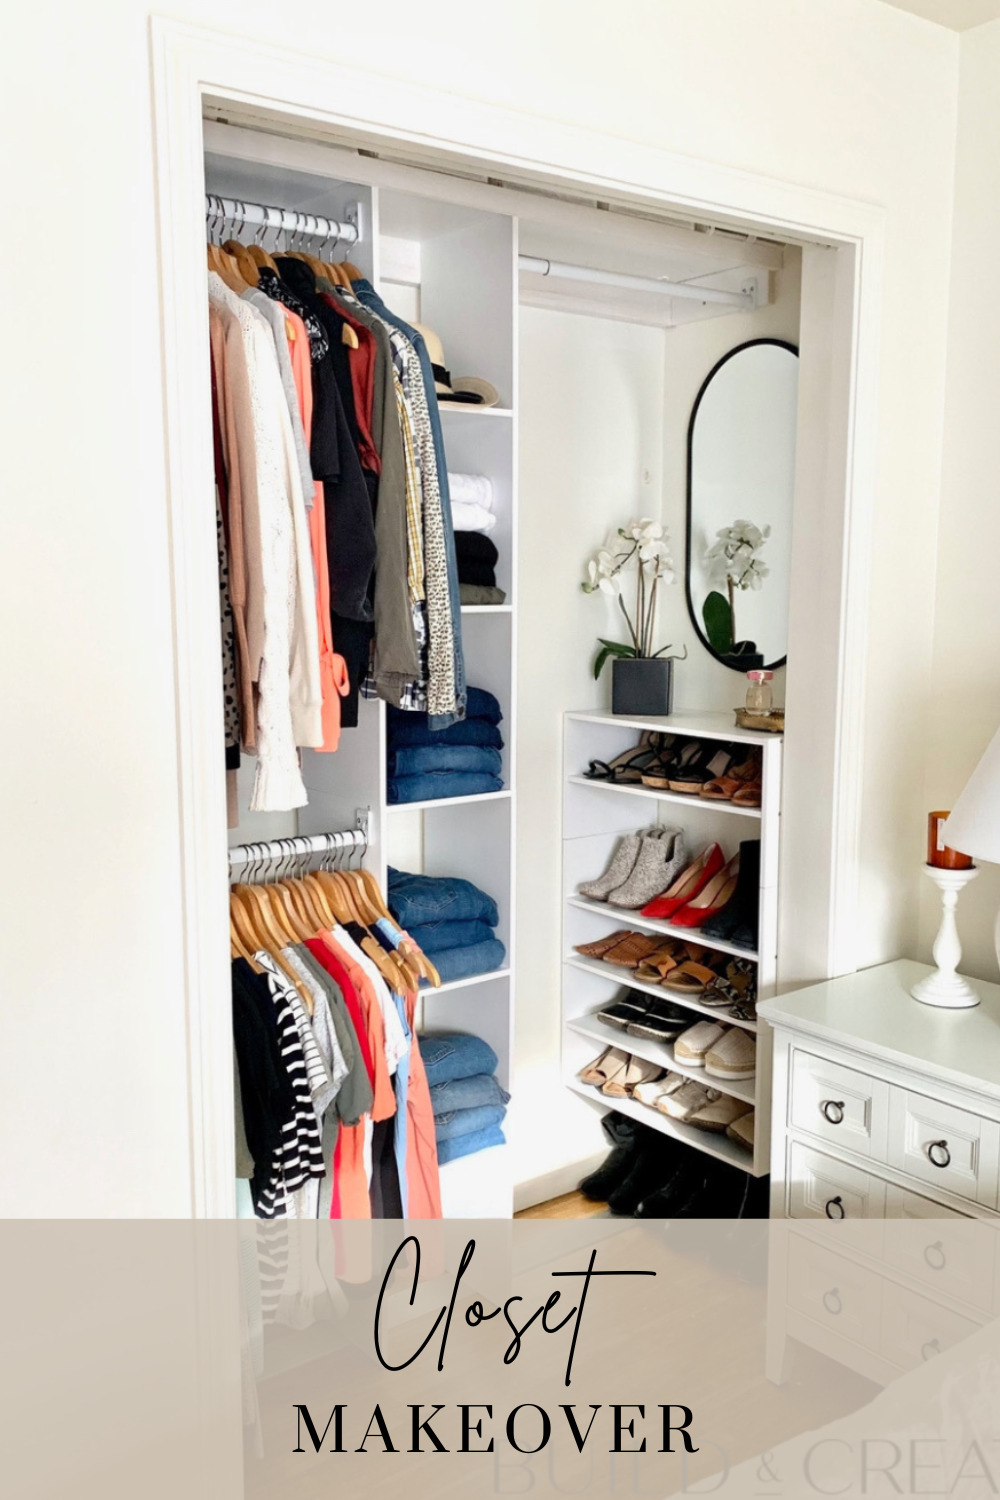 4 Ways to Create More Space in a Small Closet